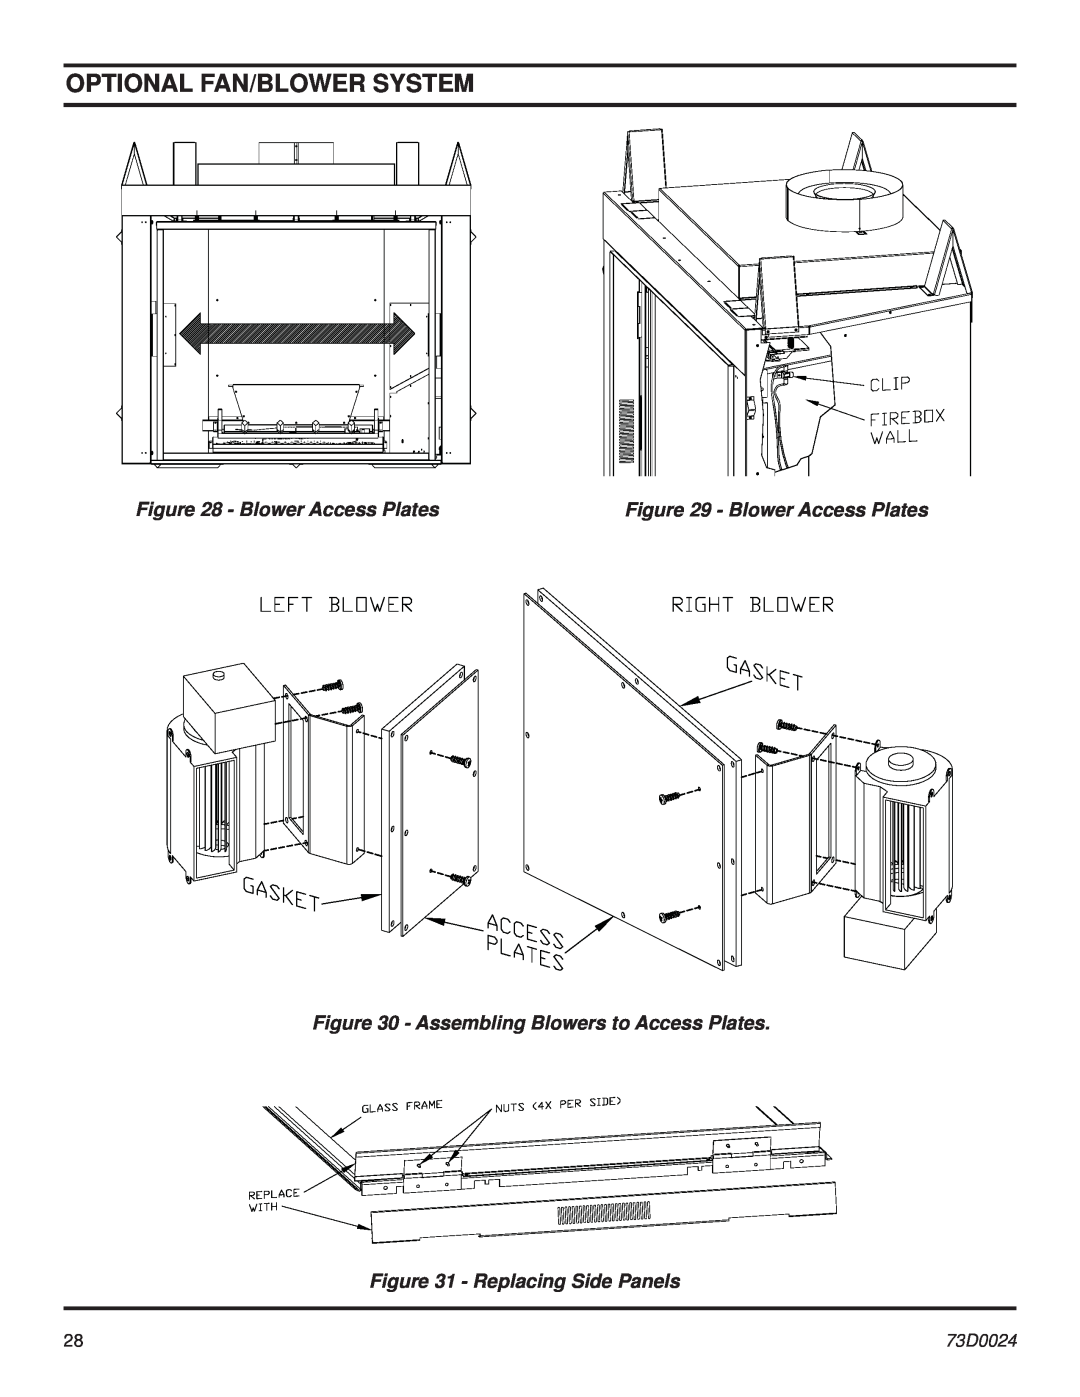 Monessen Hearth KHLDV SERIES manual Optional Fan/Blower System, Blower Access Plates, Assembling Blowers to Access Plates 